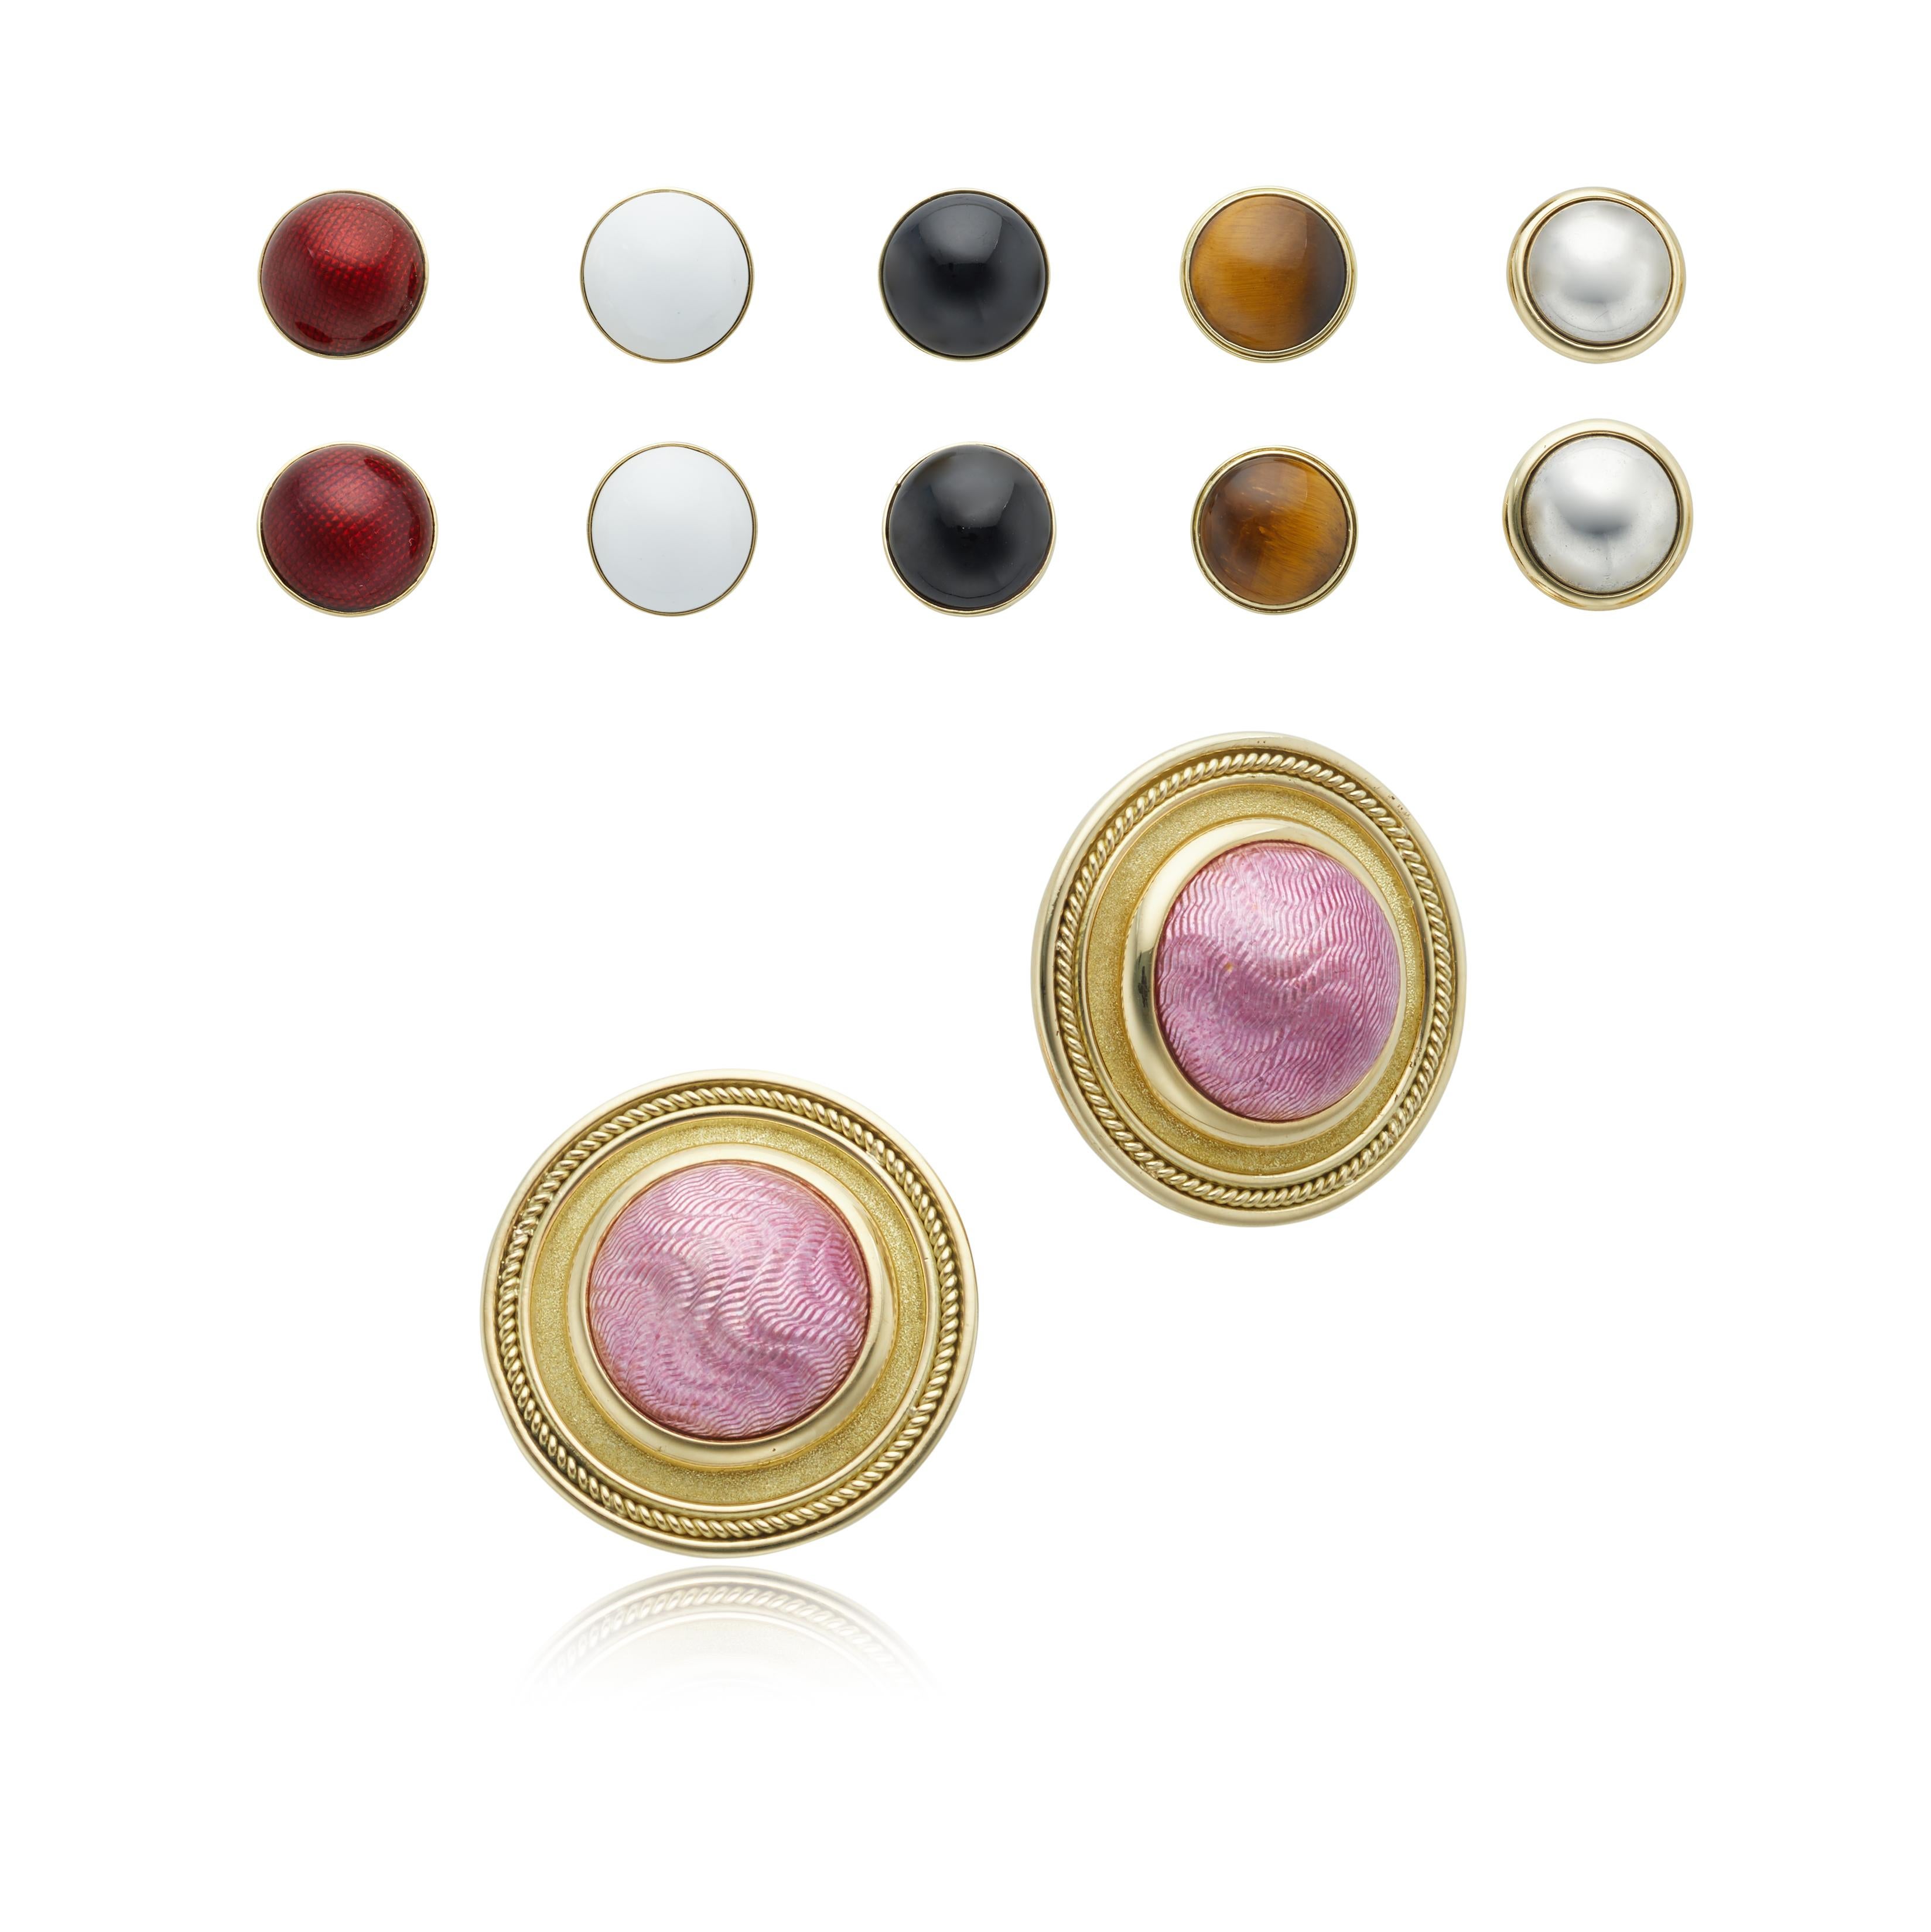 These 18 karat yellow gold “whiteside” clip earrings come with seven interchangeable round enamel centers; including colors such as pink, white, black, red, silver, gold and tiger’s eye. 